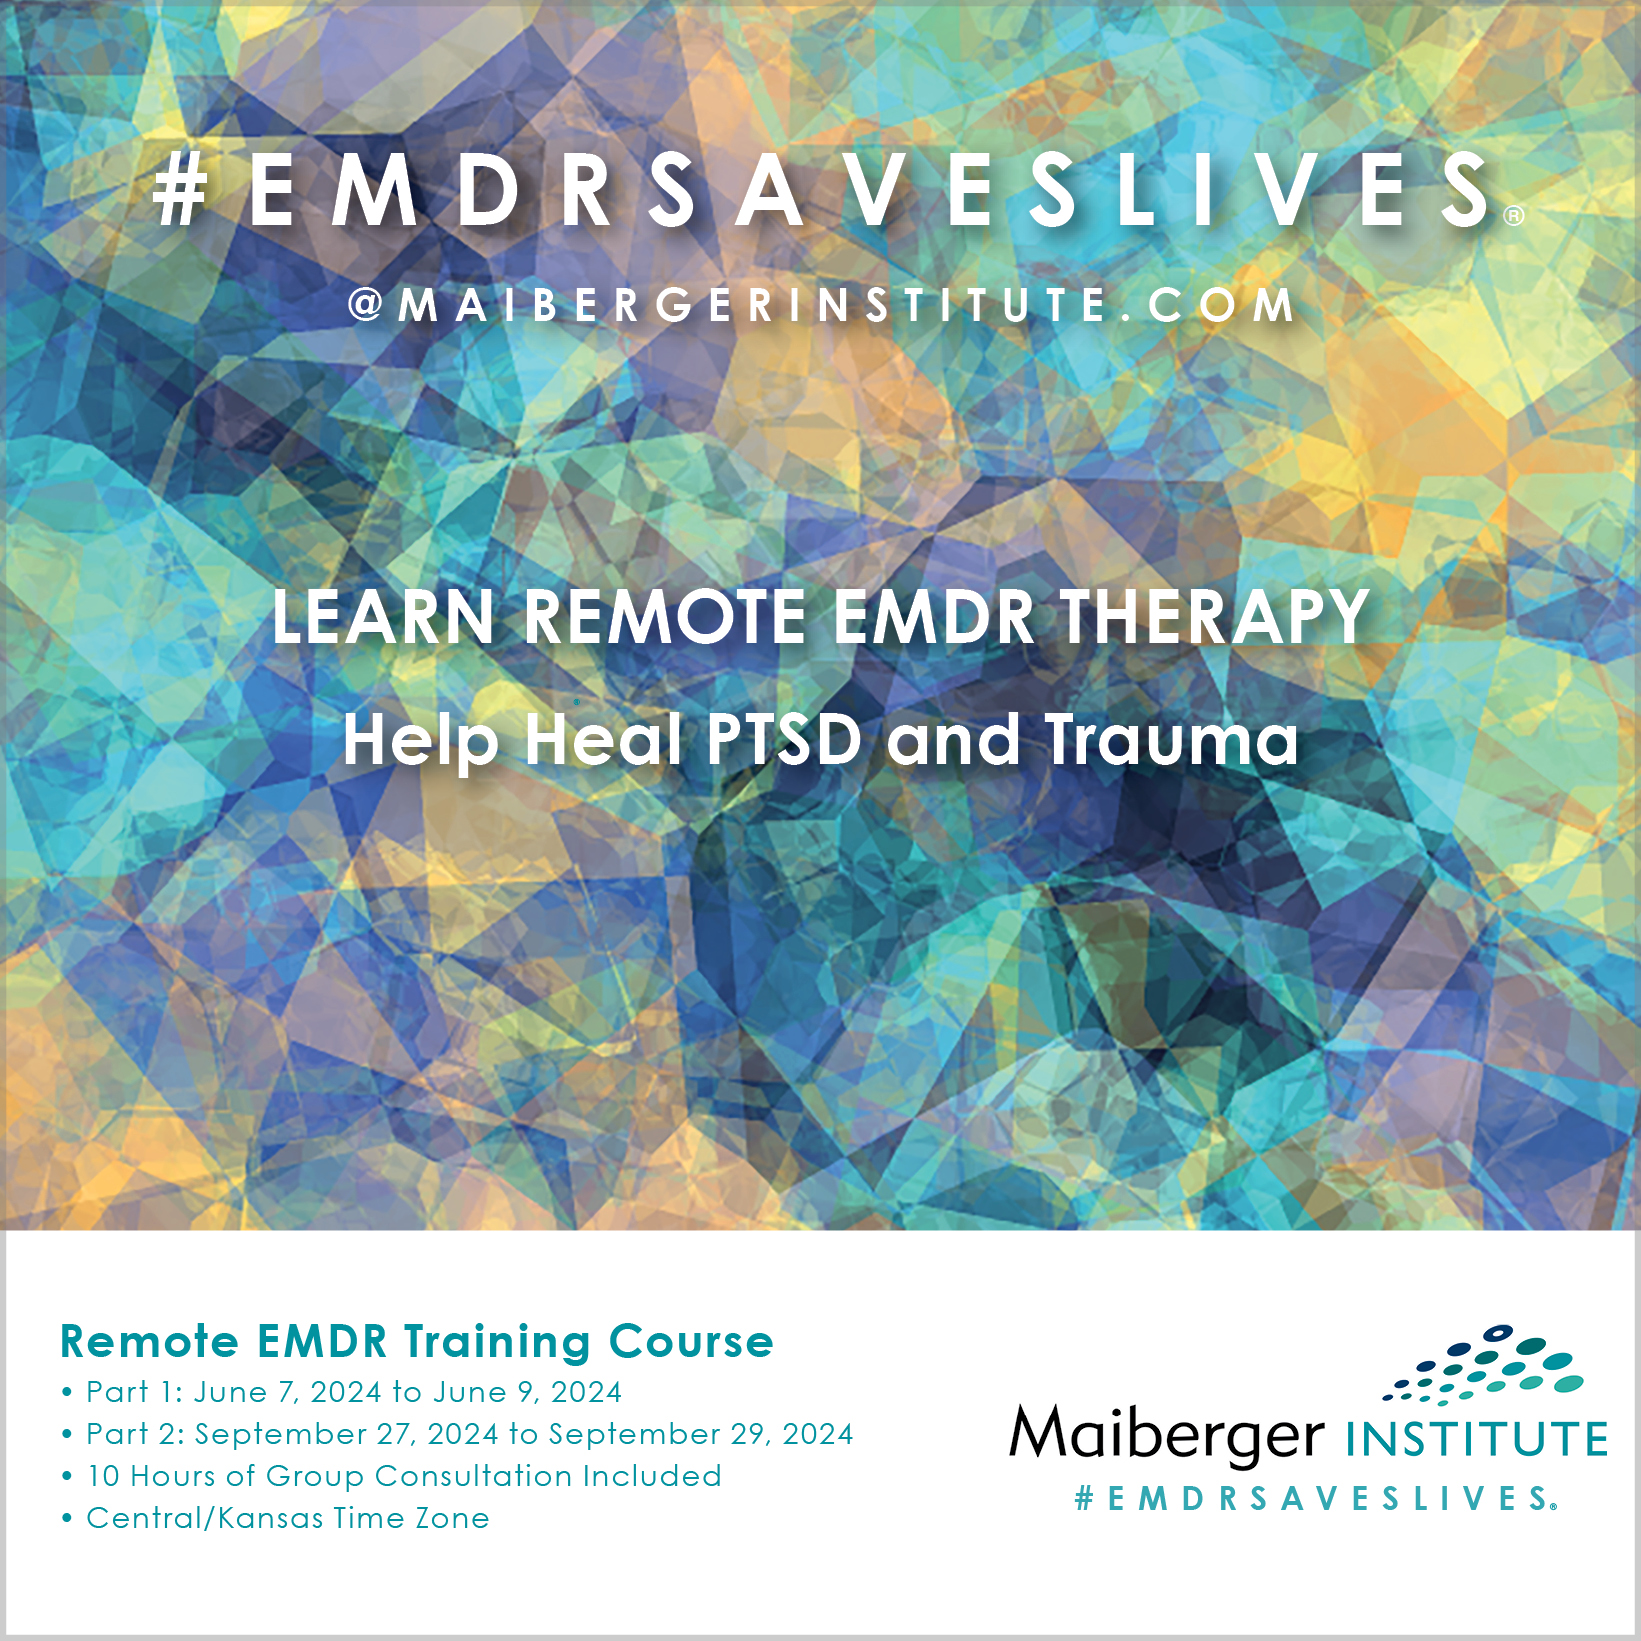 Complete Remote EMDR Training Course Part 1 June 7, 2024 to June 9